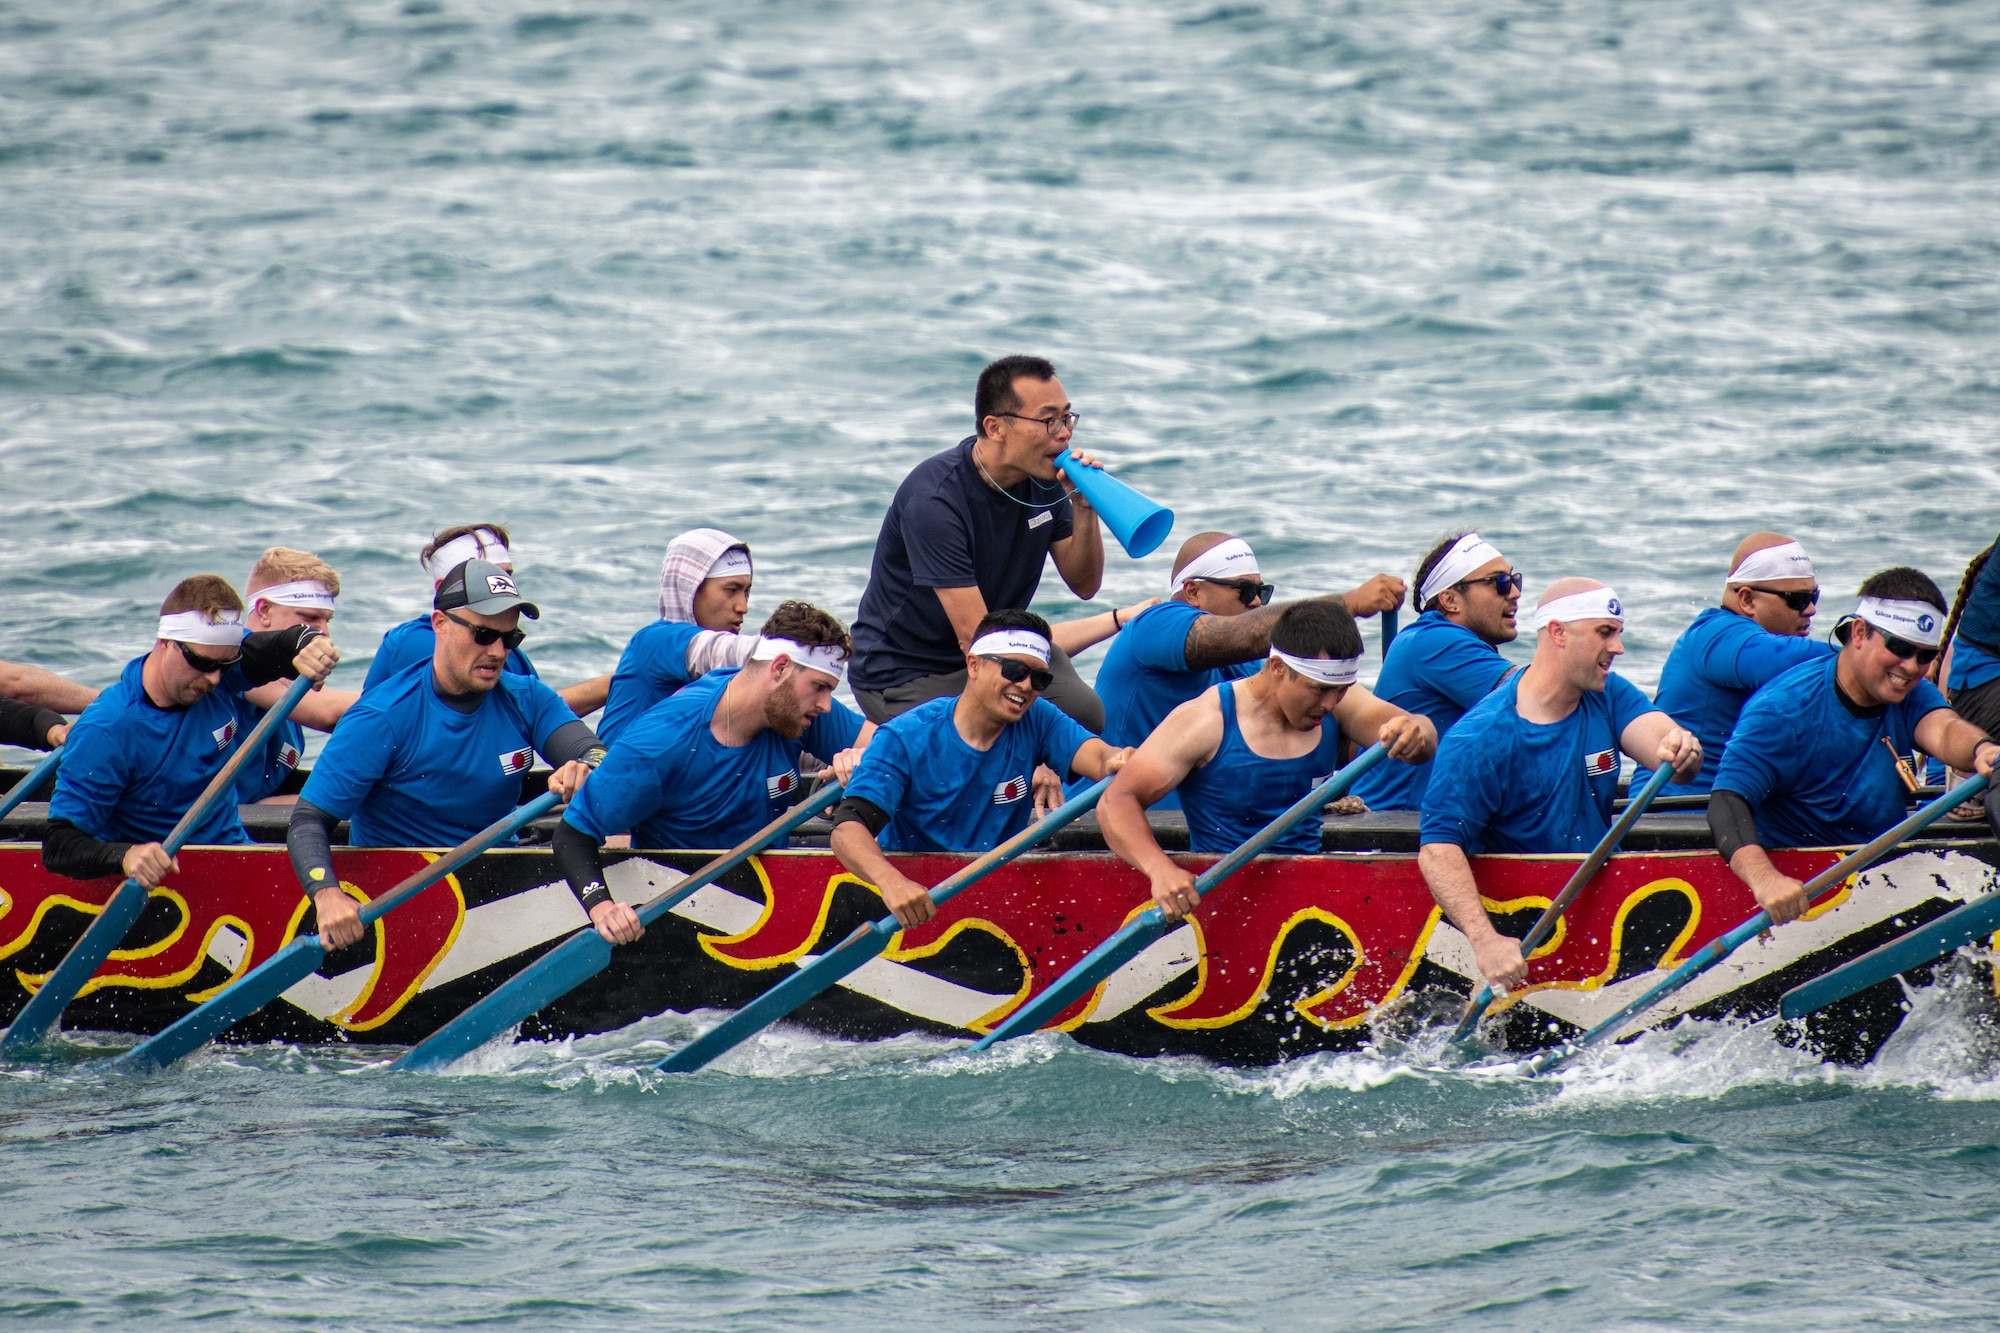 Kadena Air Base’s Shogun Men boat race team competes in the 2023 Naha Hari Dragon Boat Races in Naha City, Japan, May 5, 2023. Teams from Kadena Air Base joined other U.S. and Japanese boat teams in the first races held since the start of the COVID-19 pandemic. (U.S. Air Force photo by Lt. Col. Raymond Geoffroy)